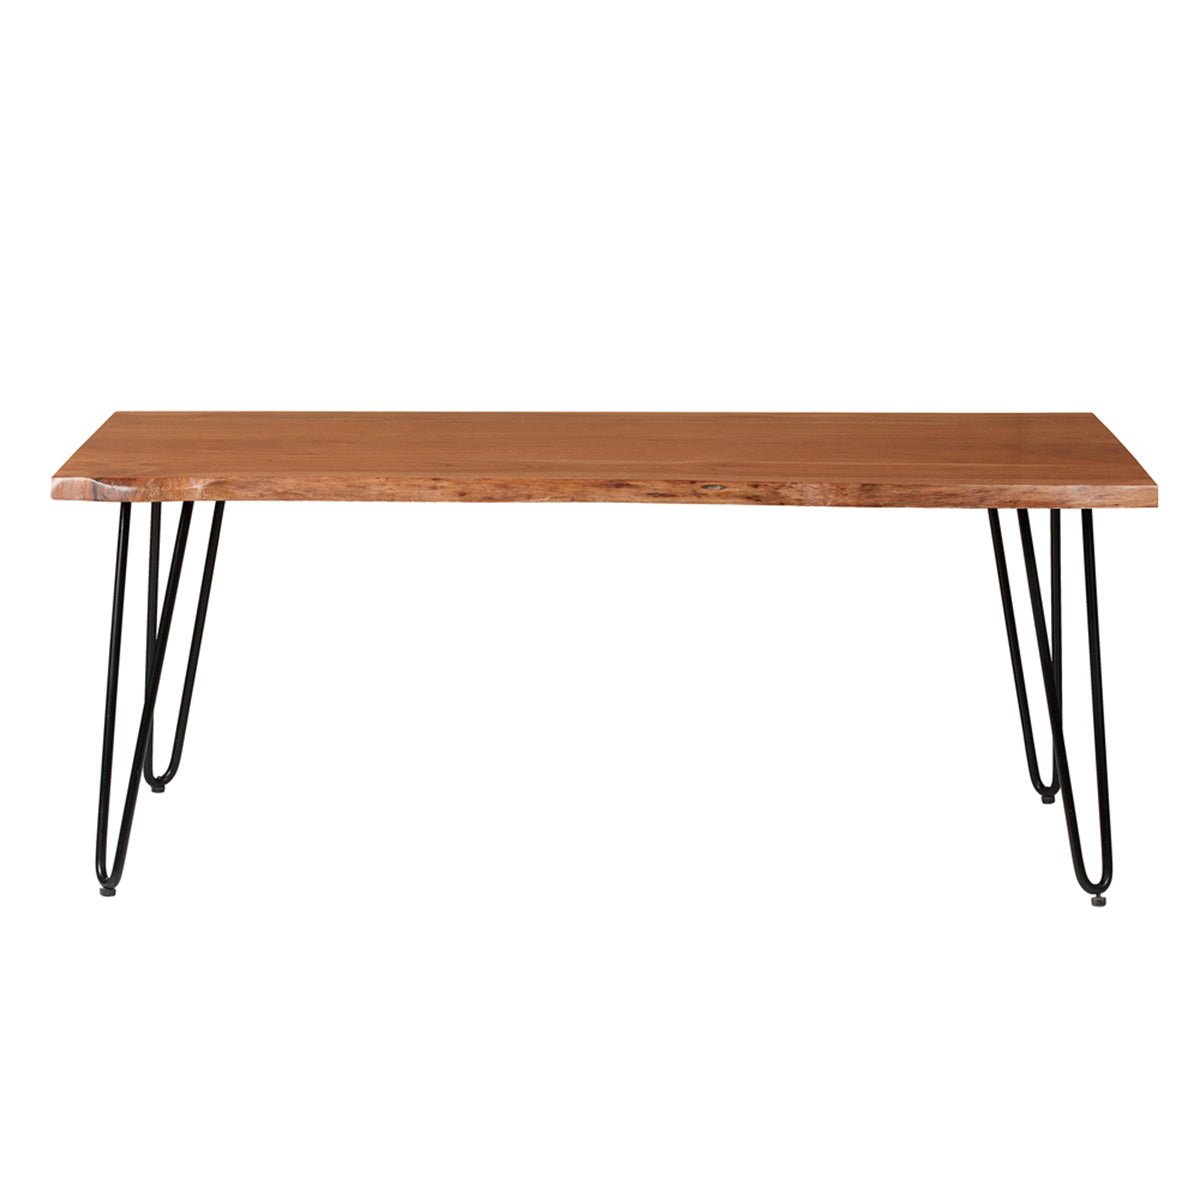 MangoLuxe Nature's Edge Solid Wood Coffee Table 46''L X 24''W X 18''H